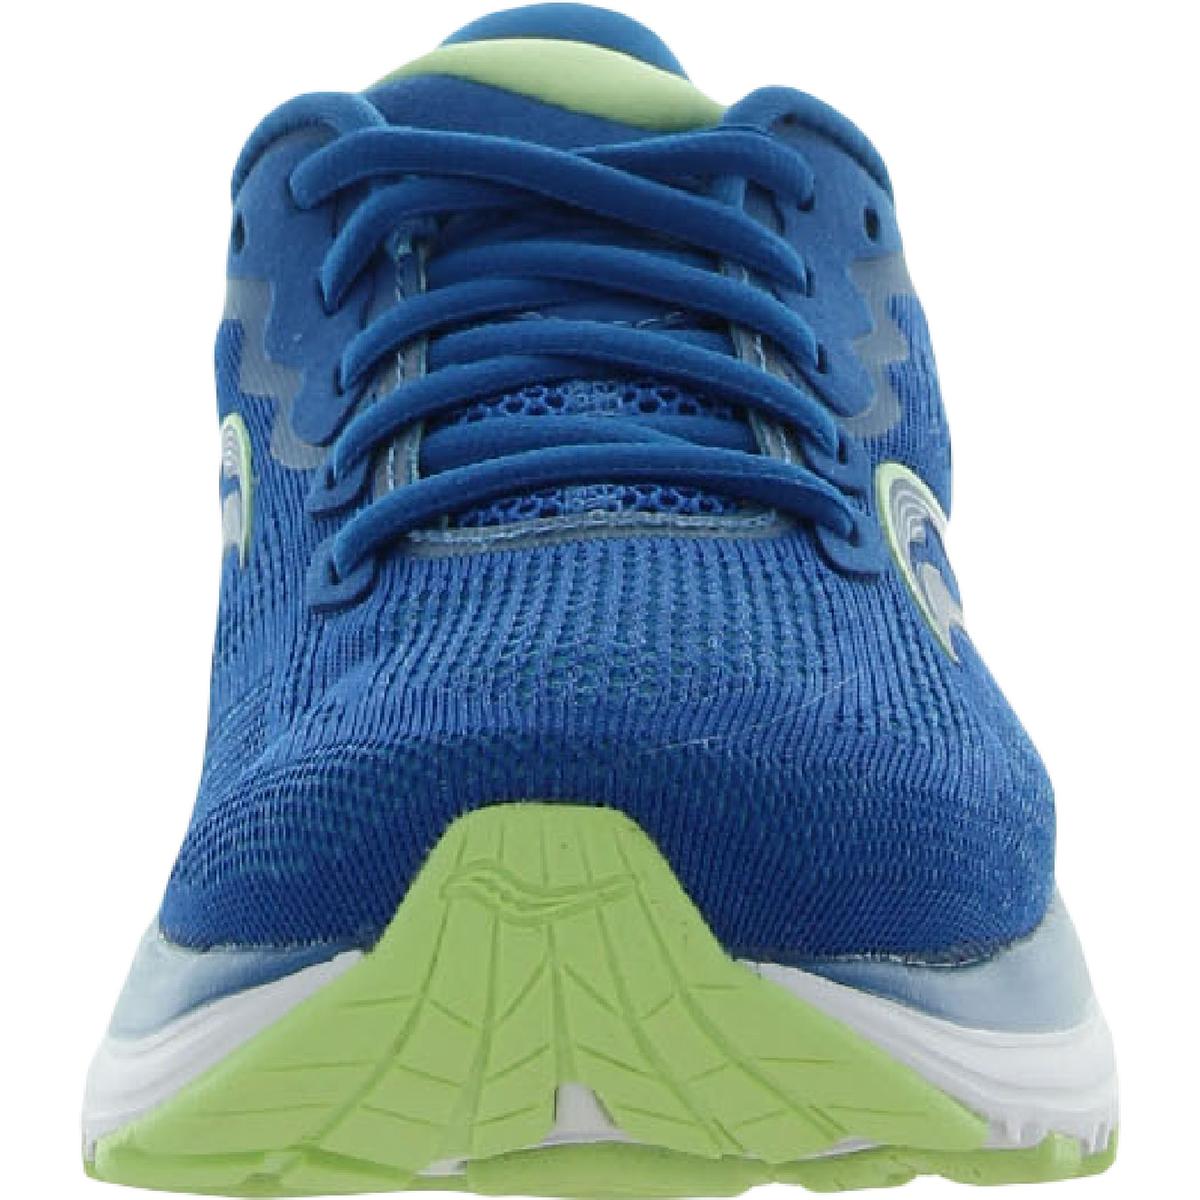 Saucony Womens Ride 14 Gym Fitness Trainers Running Shoes Sneakers BHFO ...